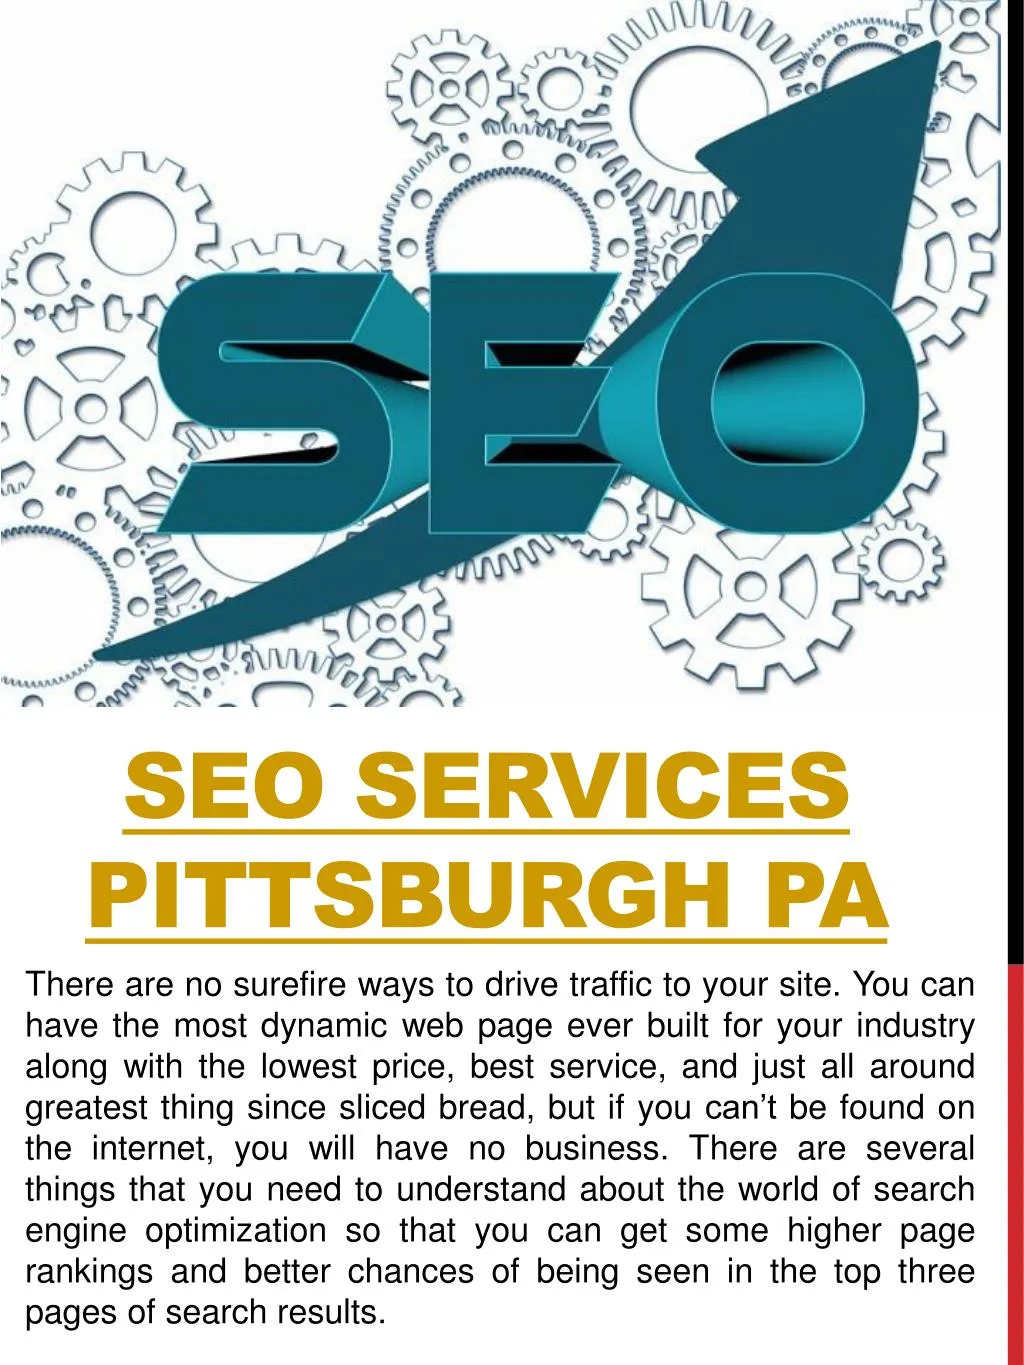 seo services pittsburgh pa n.